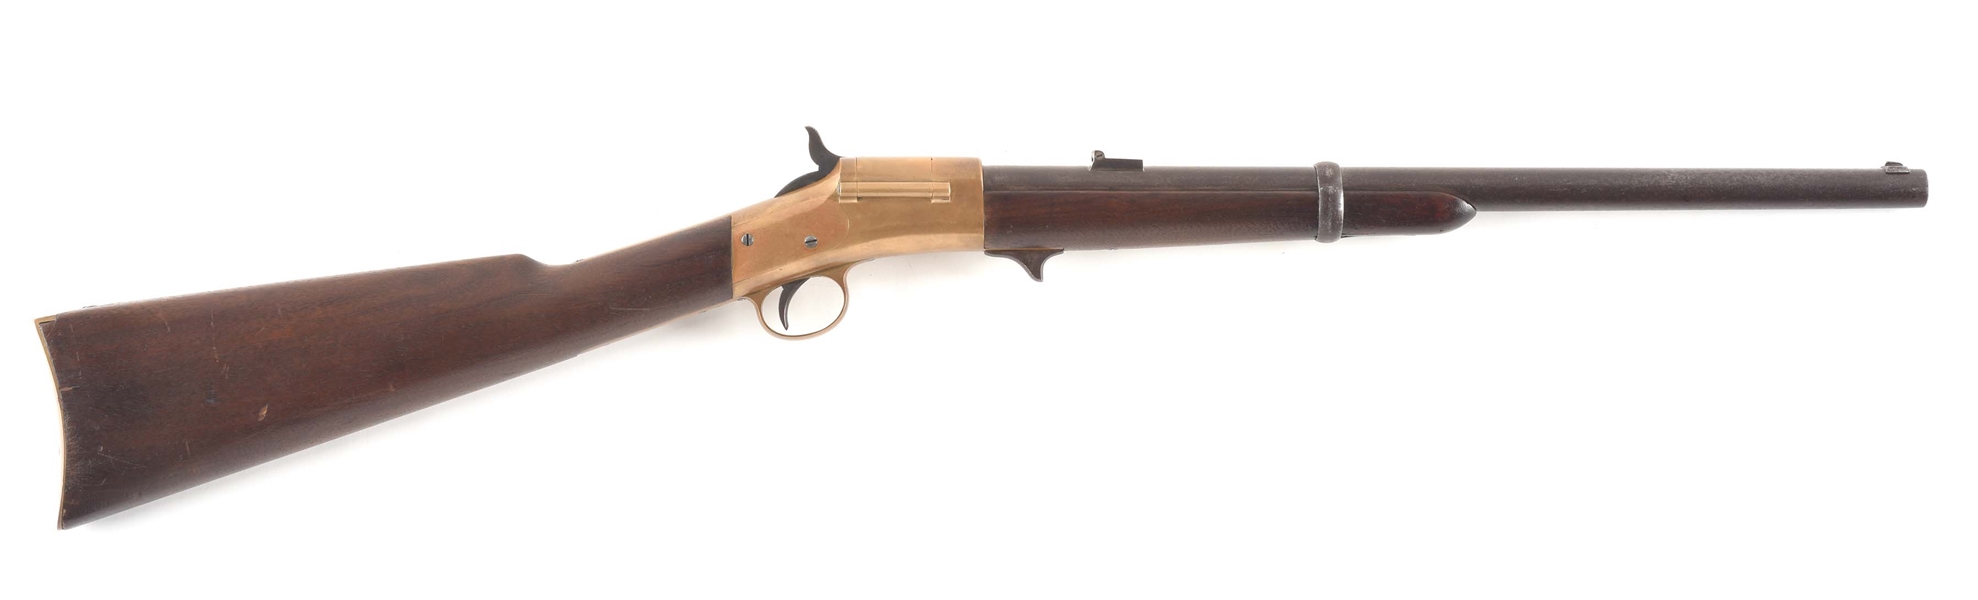 (A) WARNER 2ND CONTRACT CIVIL WAR CARBINE BUILT BY GREENE RIFLE WORKS.